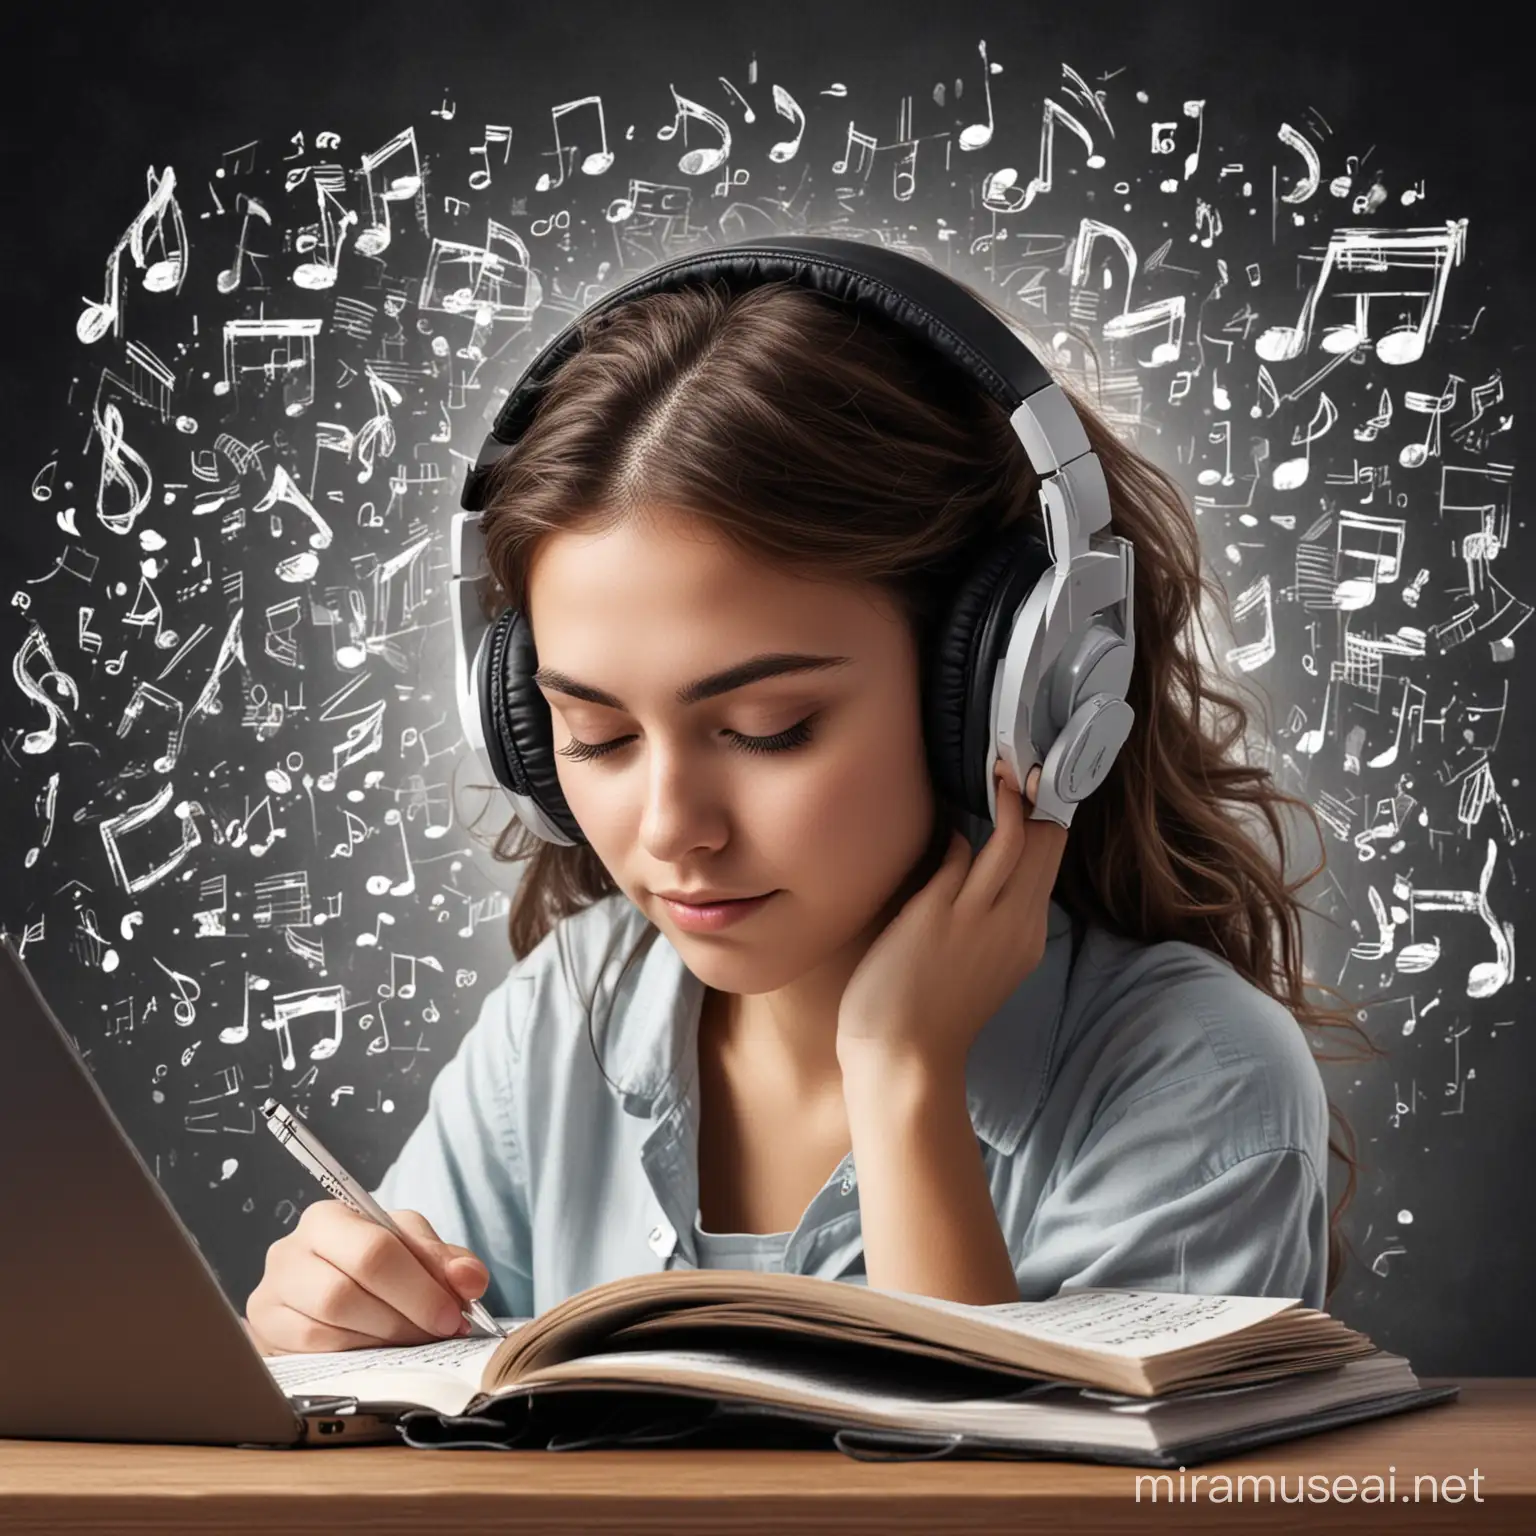 An illustration of a student studying with headphones on, surrounded by musical notes and symbols, representing the integration of music into study sessions for enhanced cognitive performance.